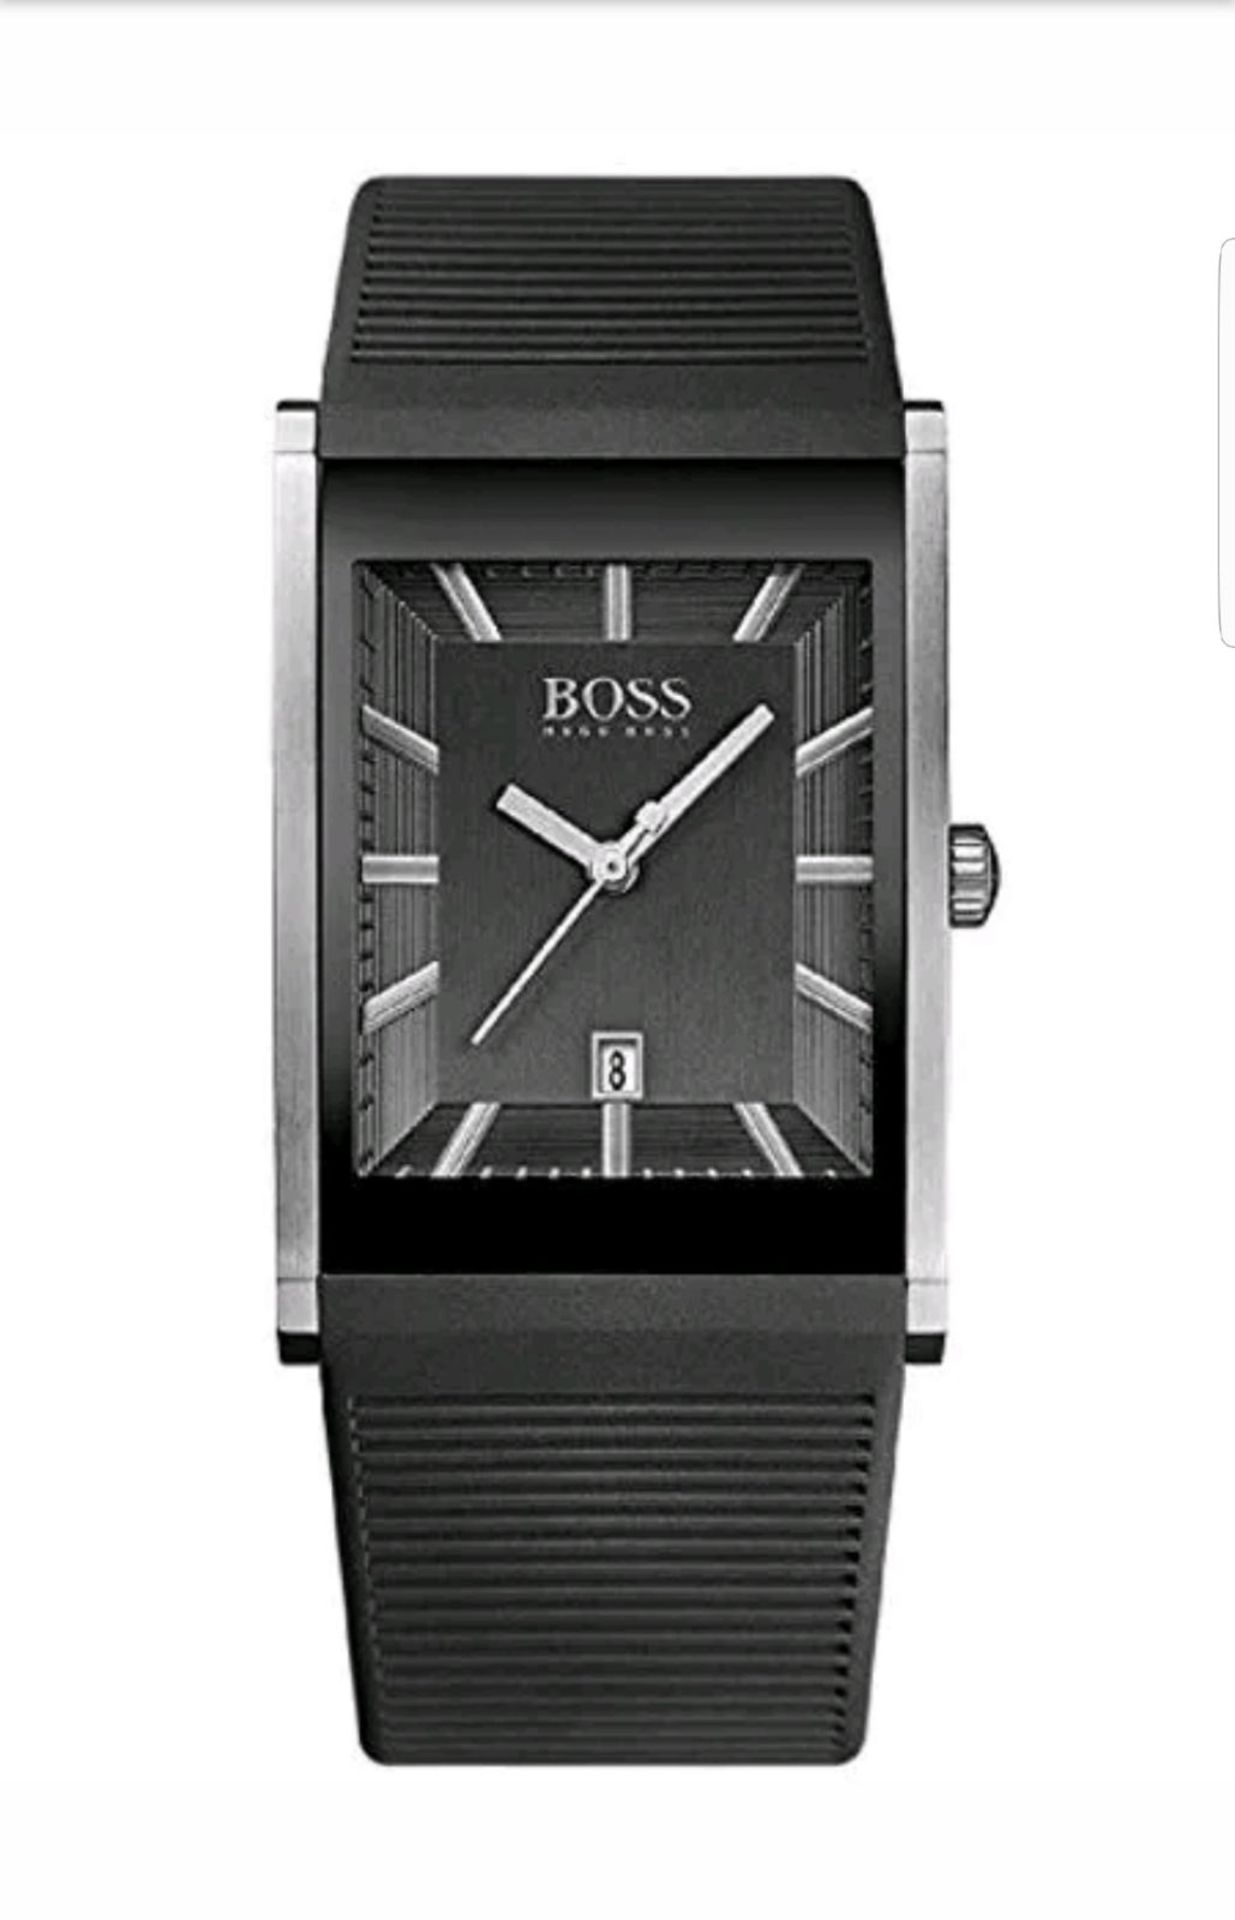 BRAND NEW GENTS HUGO BOSS WATCH 1512980, COMPLETE WITH ORIGINAL BOX AND MANUAL